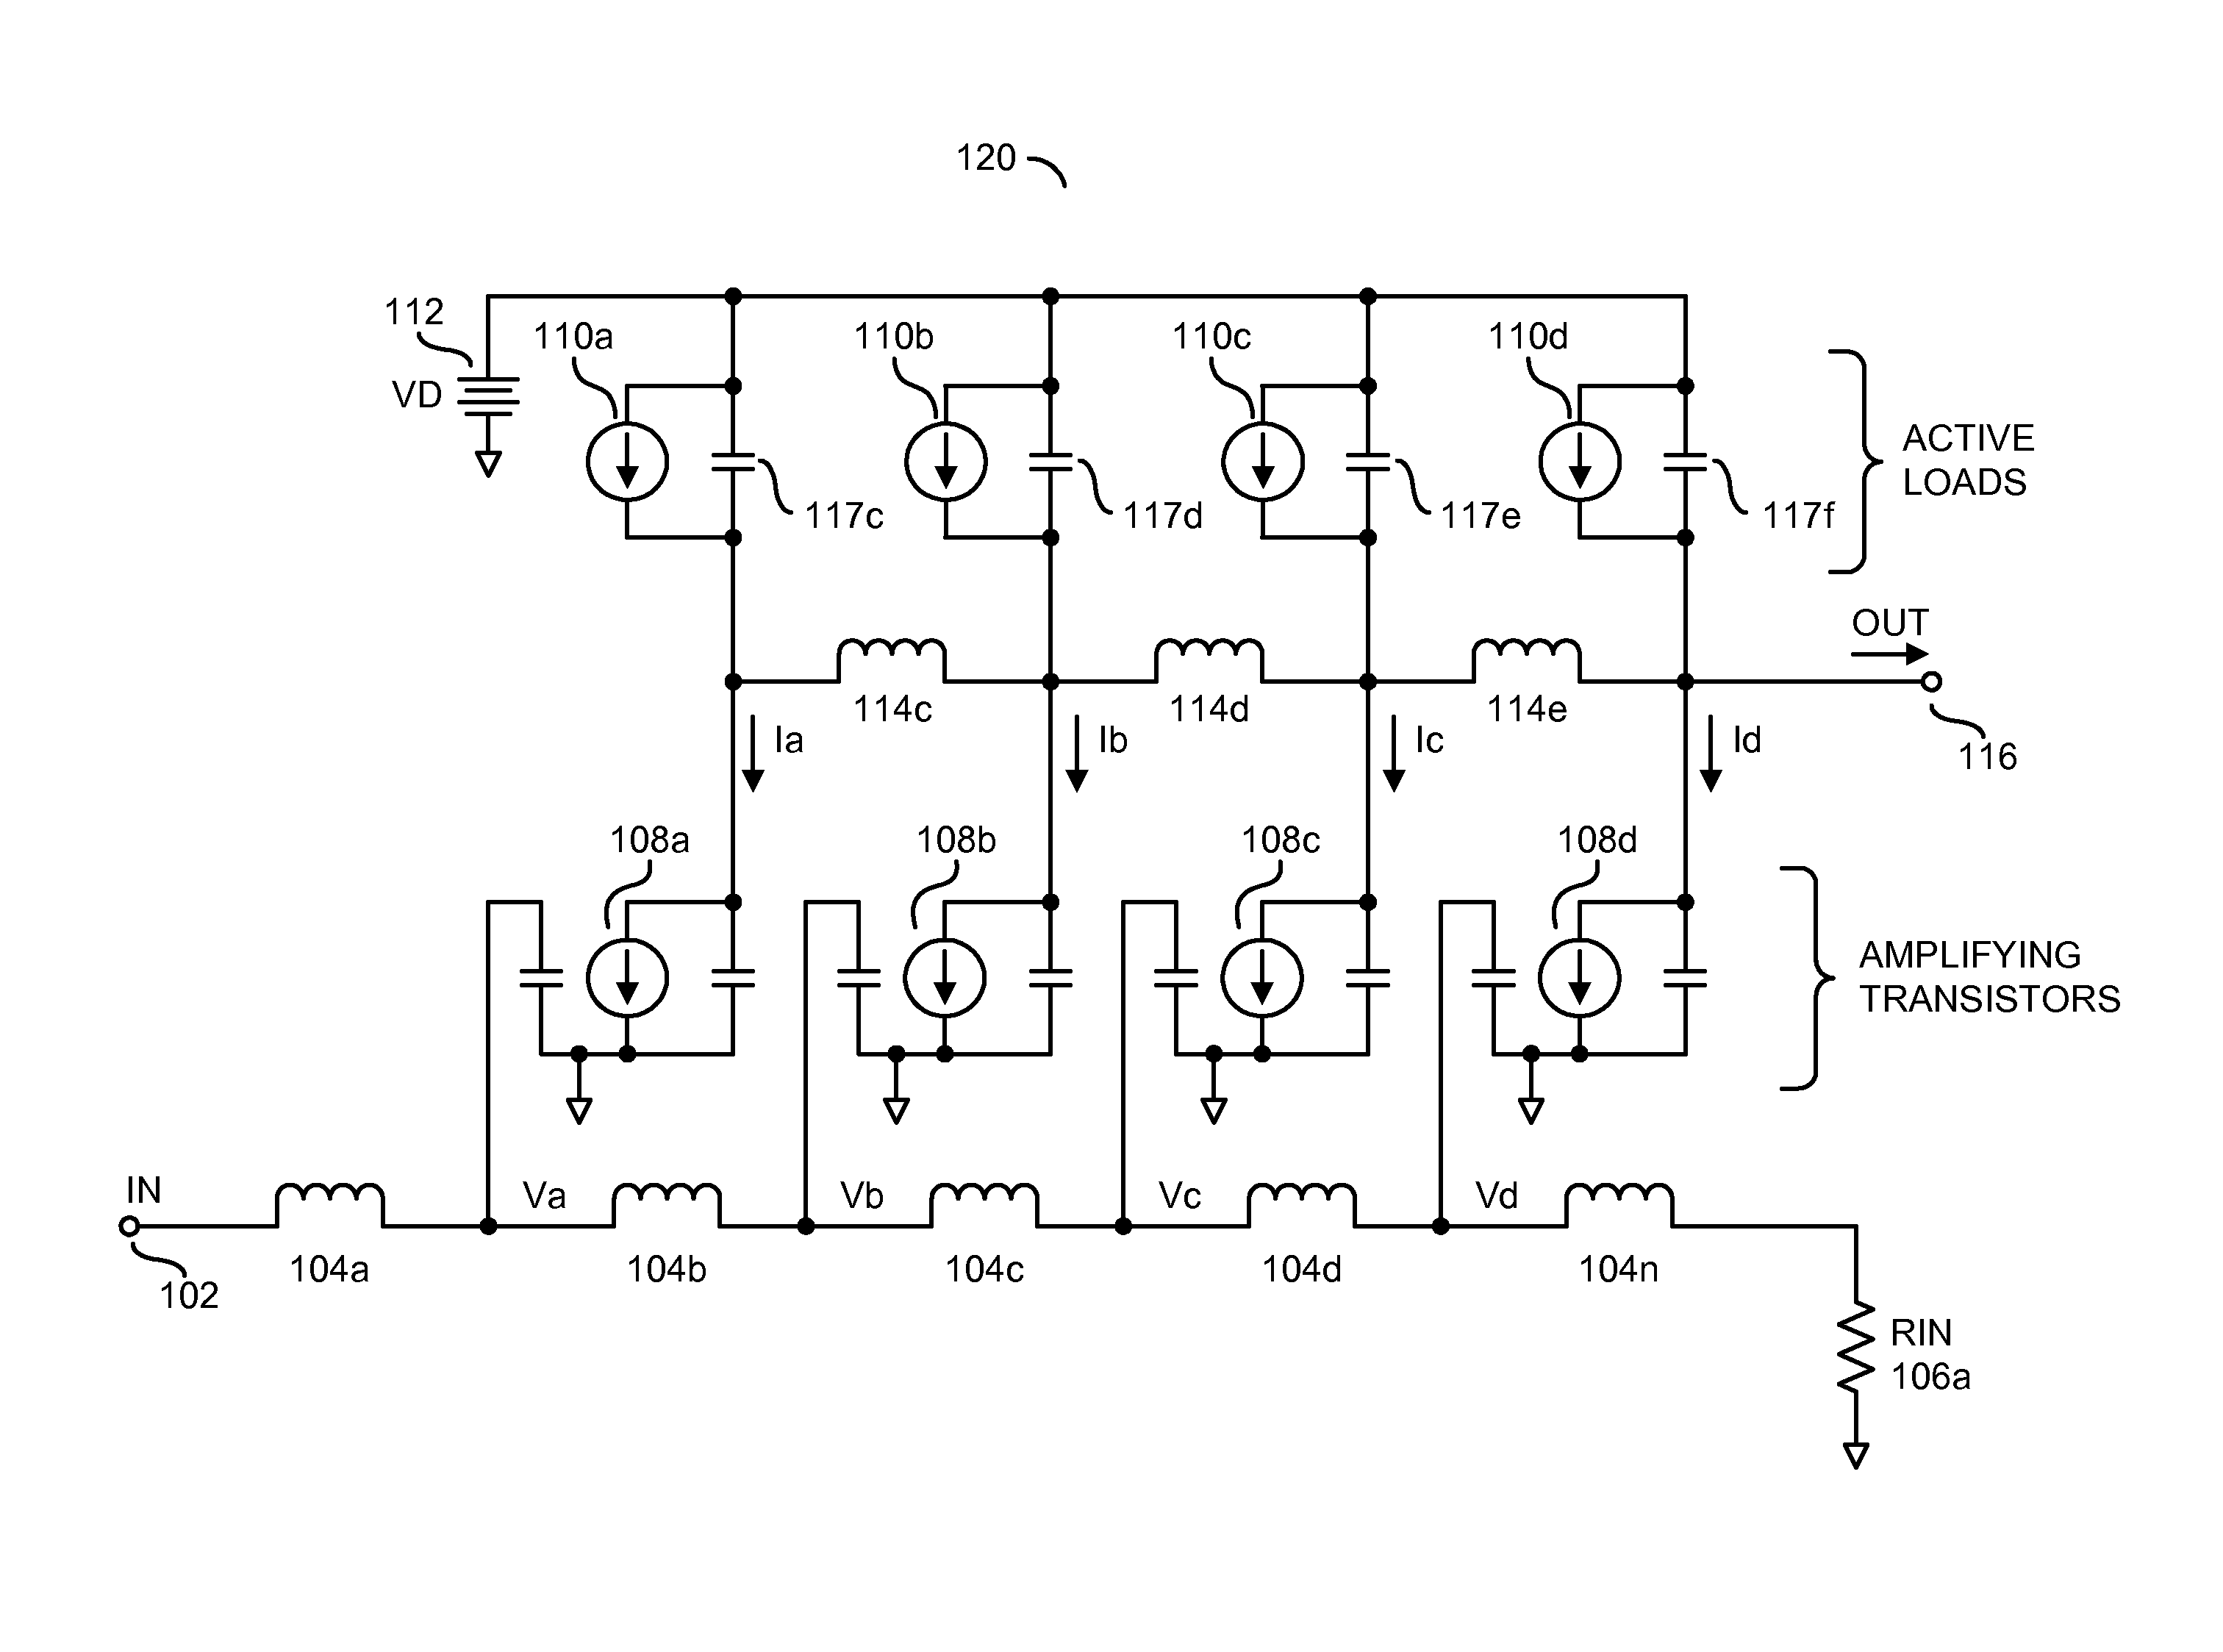 Distributed transconductance amplifier